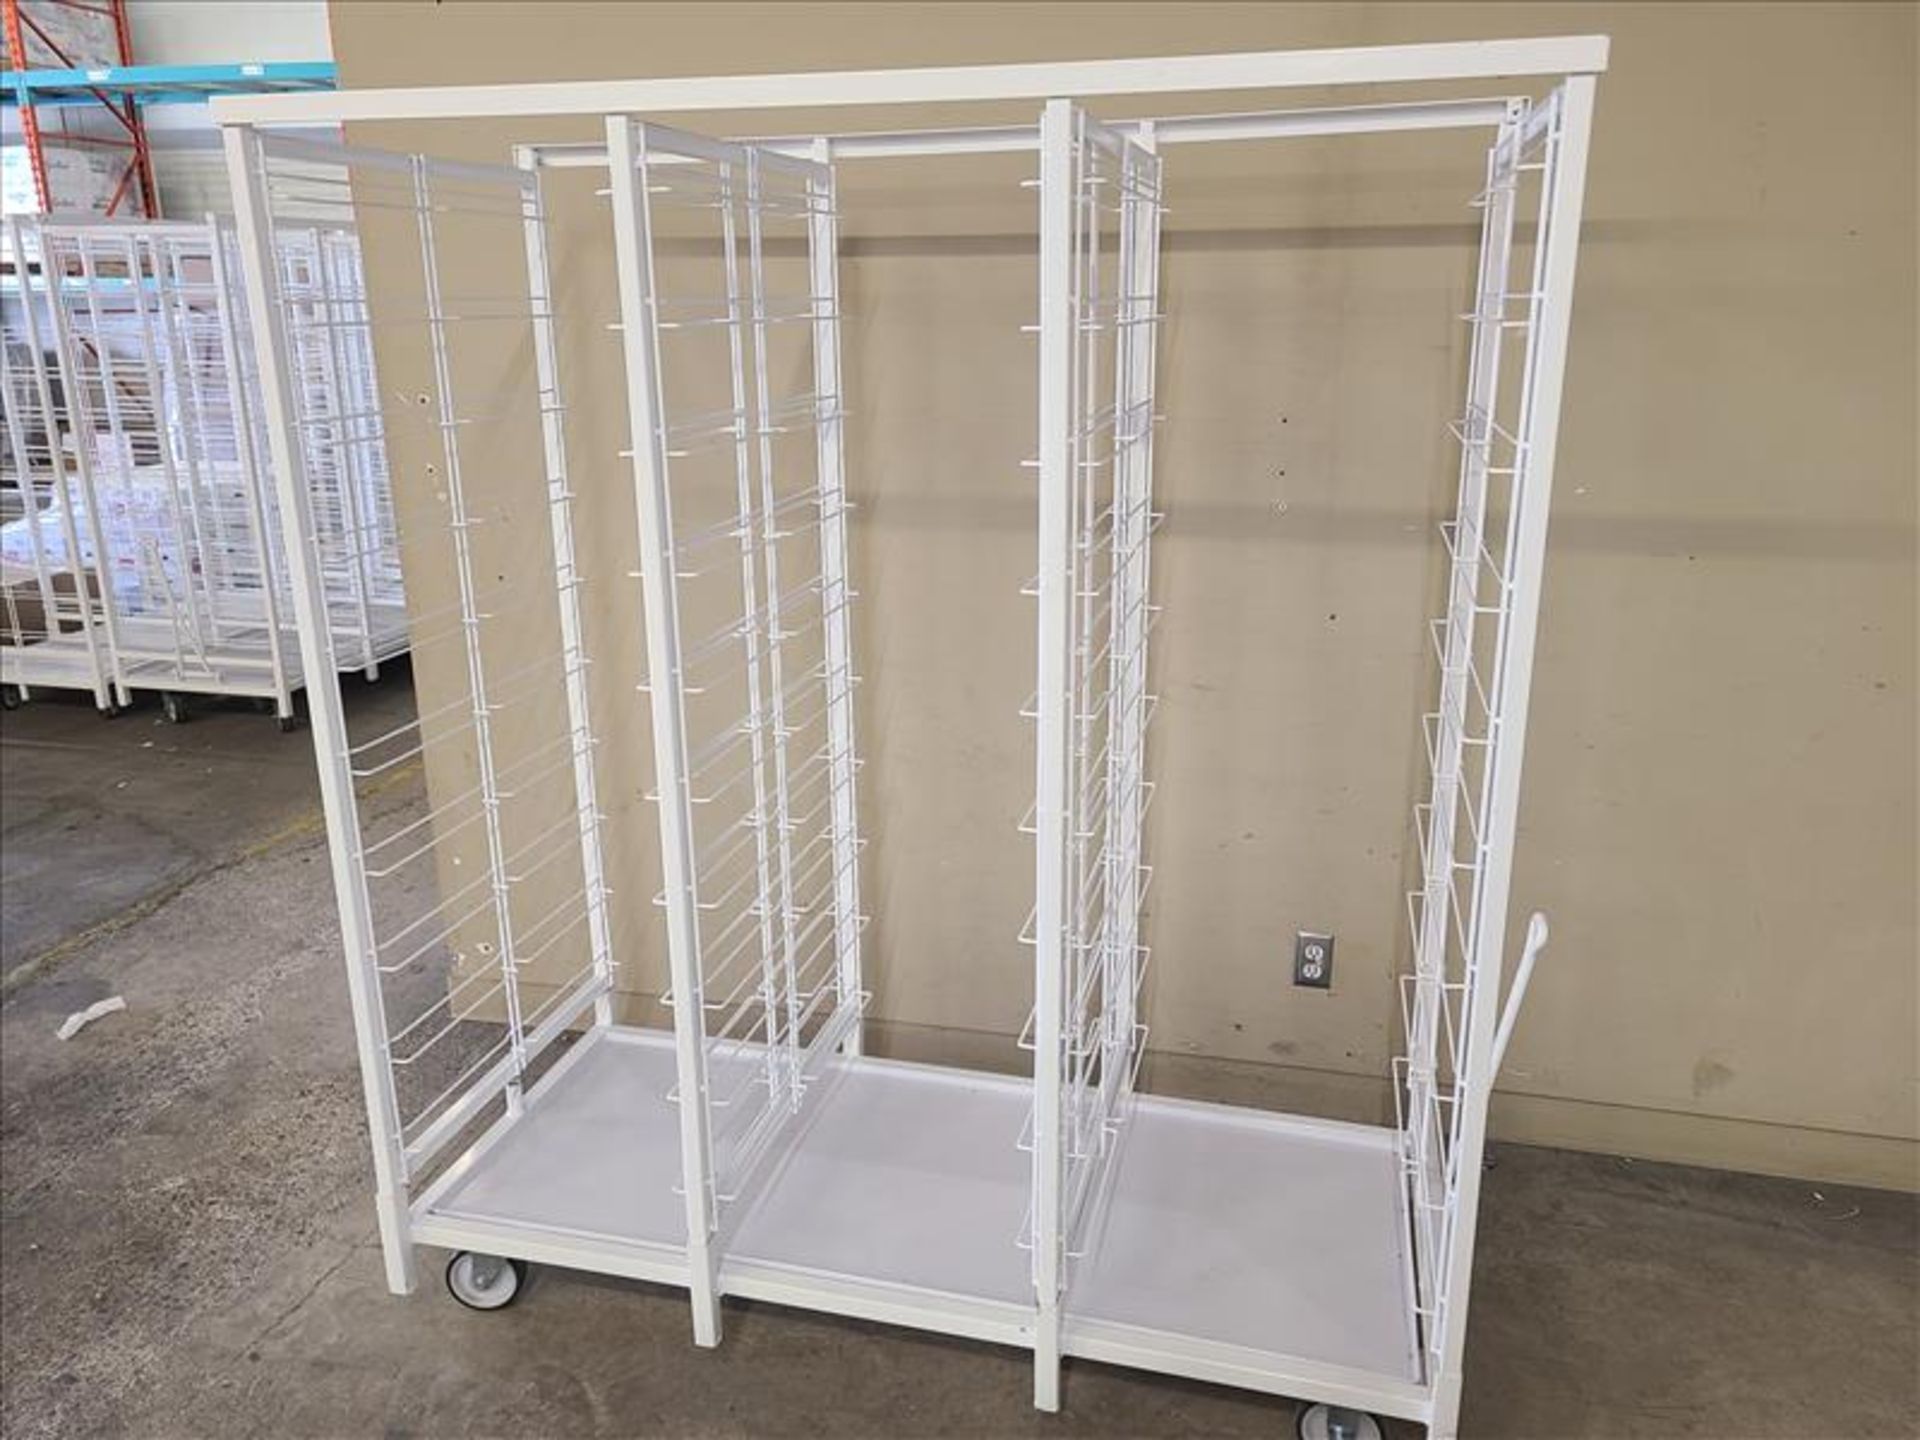 NEW VRE integrated plant production/tray drying racks, mod. DRYMAX30, 25.5 in. x 62 in. x 72 in. - Image 2 of 2